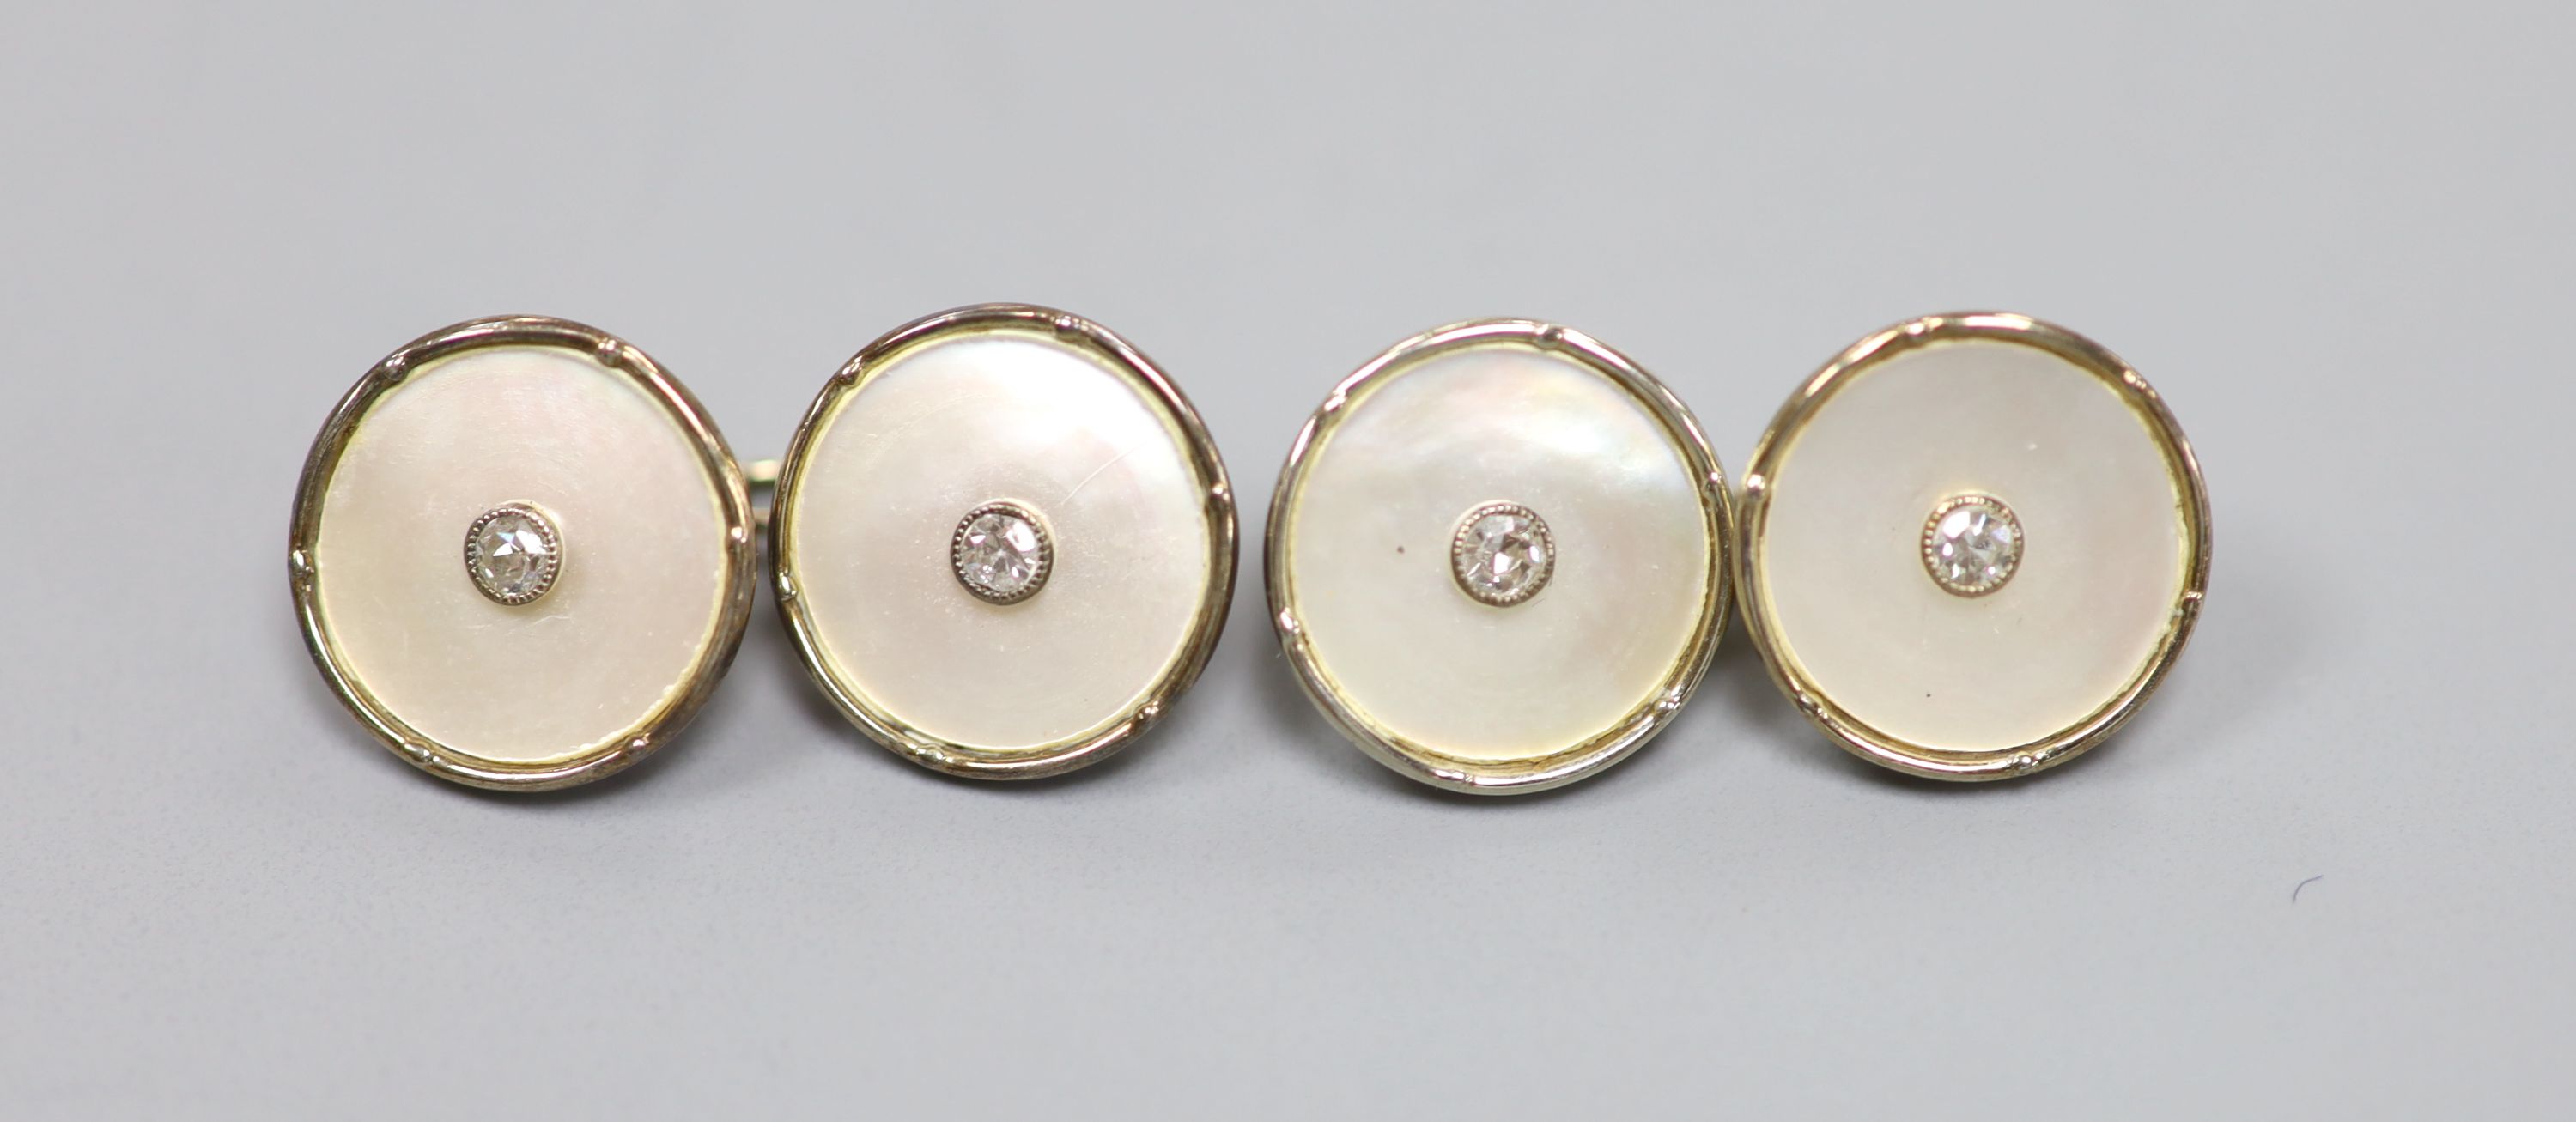 A pair of 18ct, mother of pearl and diamond set circular cufflinks